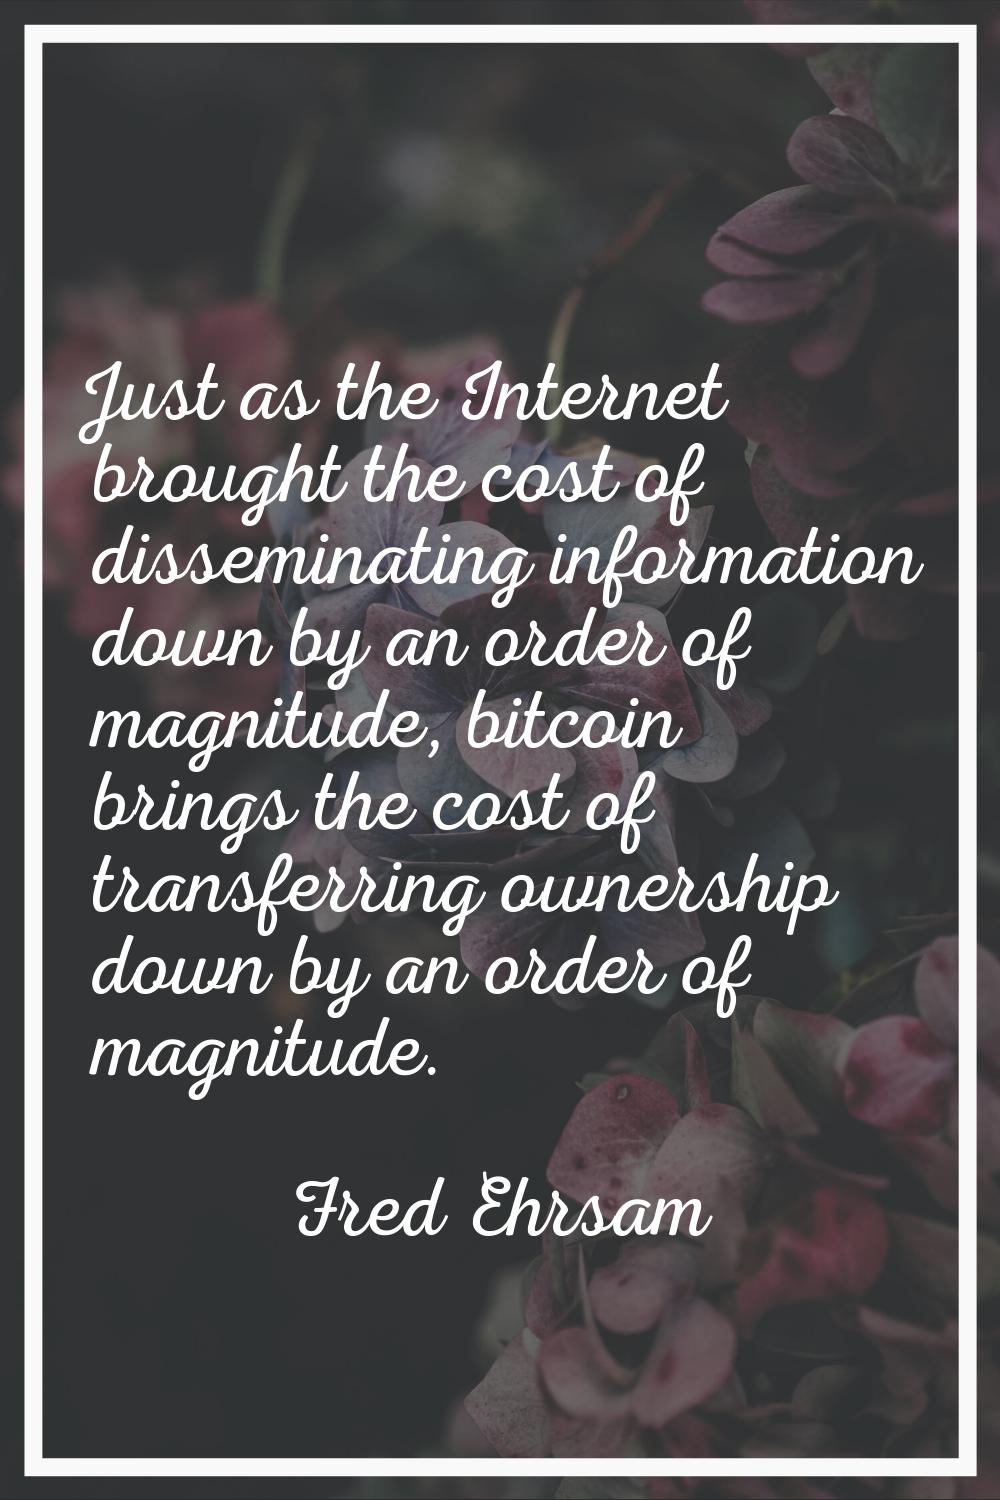 Just as the Internet brought the cost of disseminating information down by an order of magnitude, b